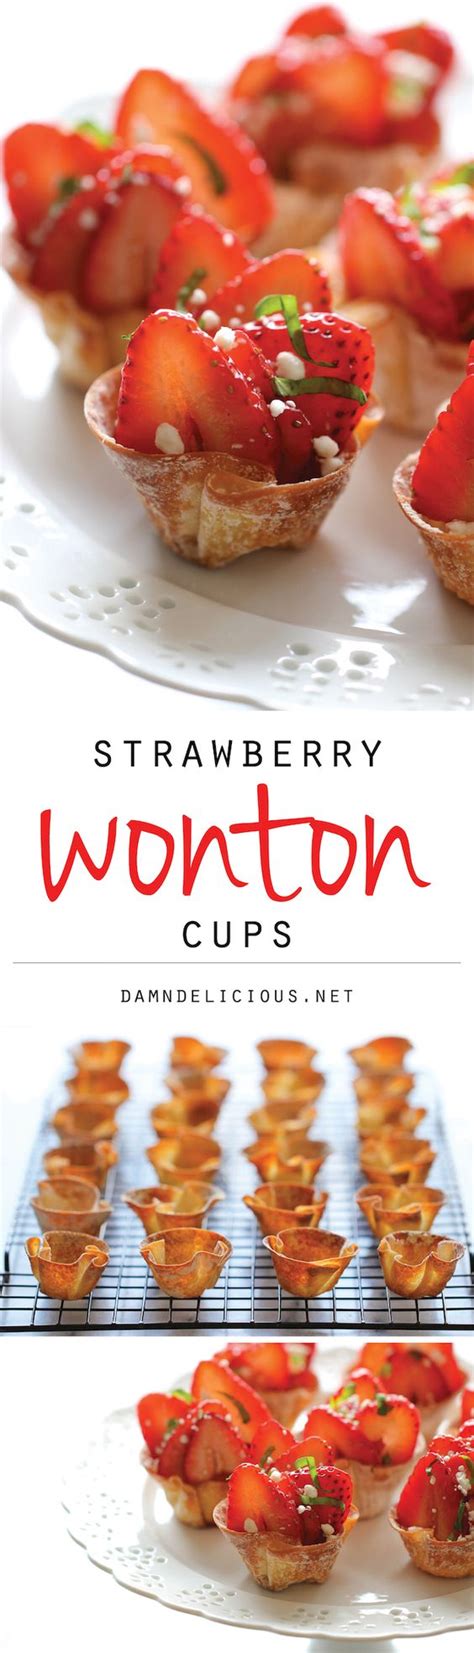 Use wonton wrappers to enclose buffalo chicken, bananas and nutella, or shrimp. Strawberry Wonton Cups | Recipe | Wonton cups, Food, Yummy ...